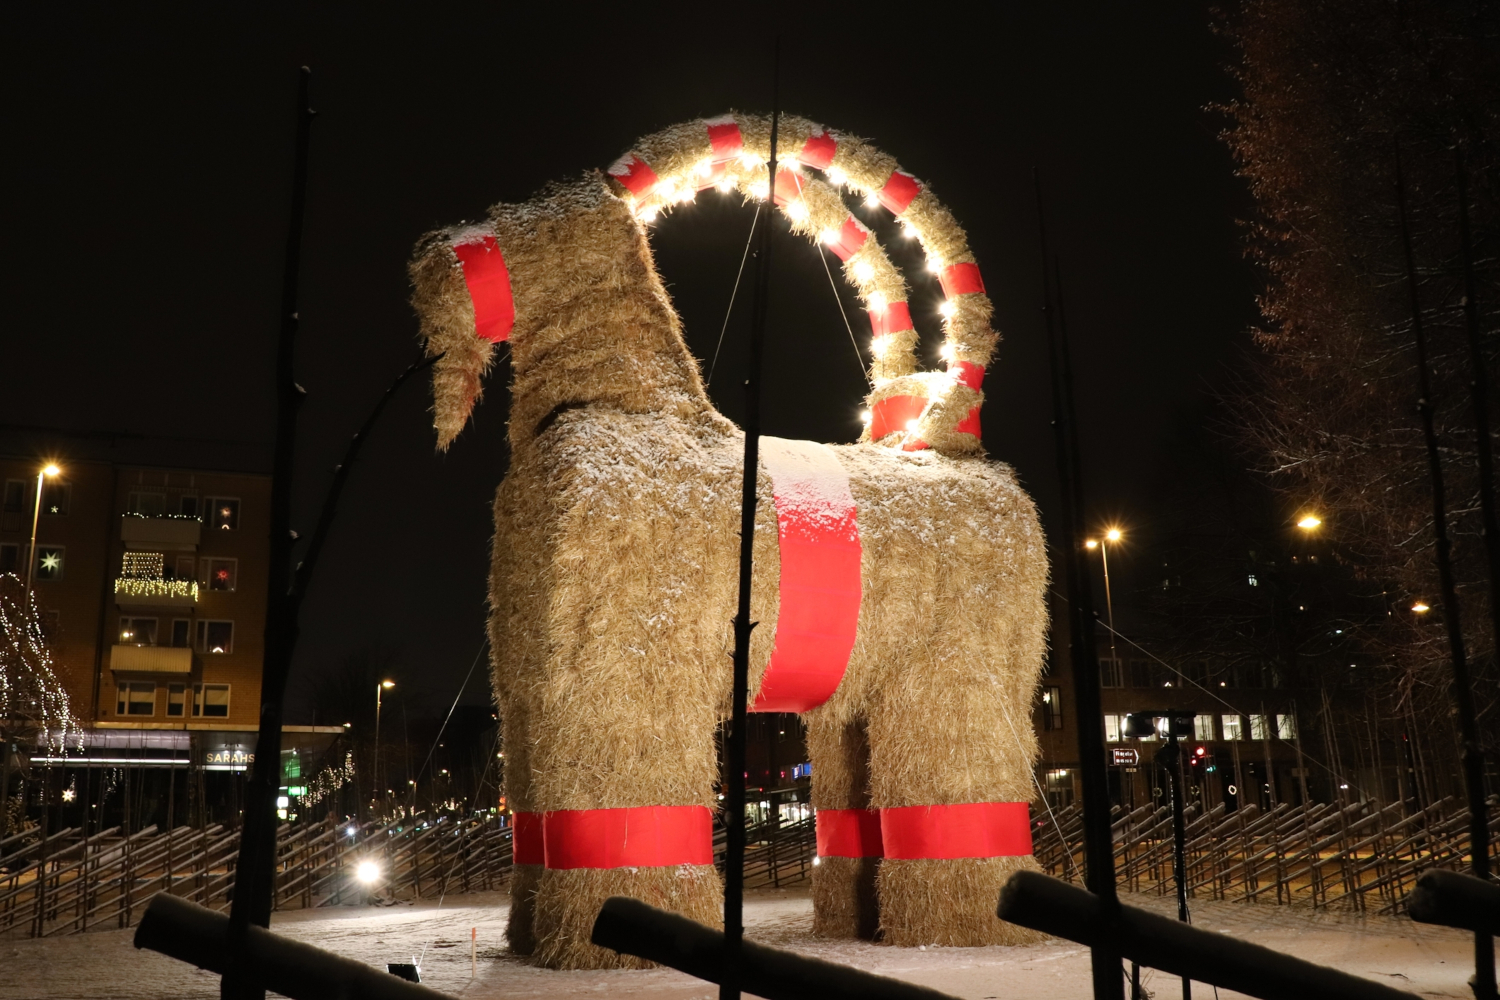 Gävle Goat in Sweden is one of the Unconventional Christmas traditions in Europe